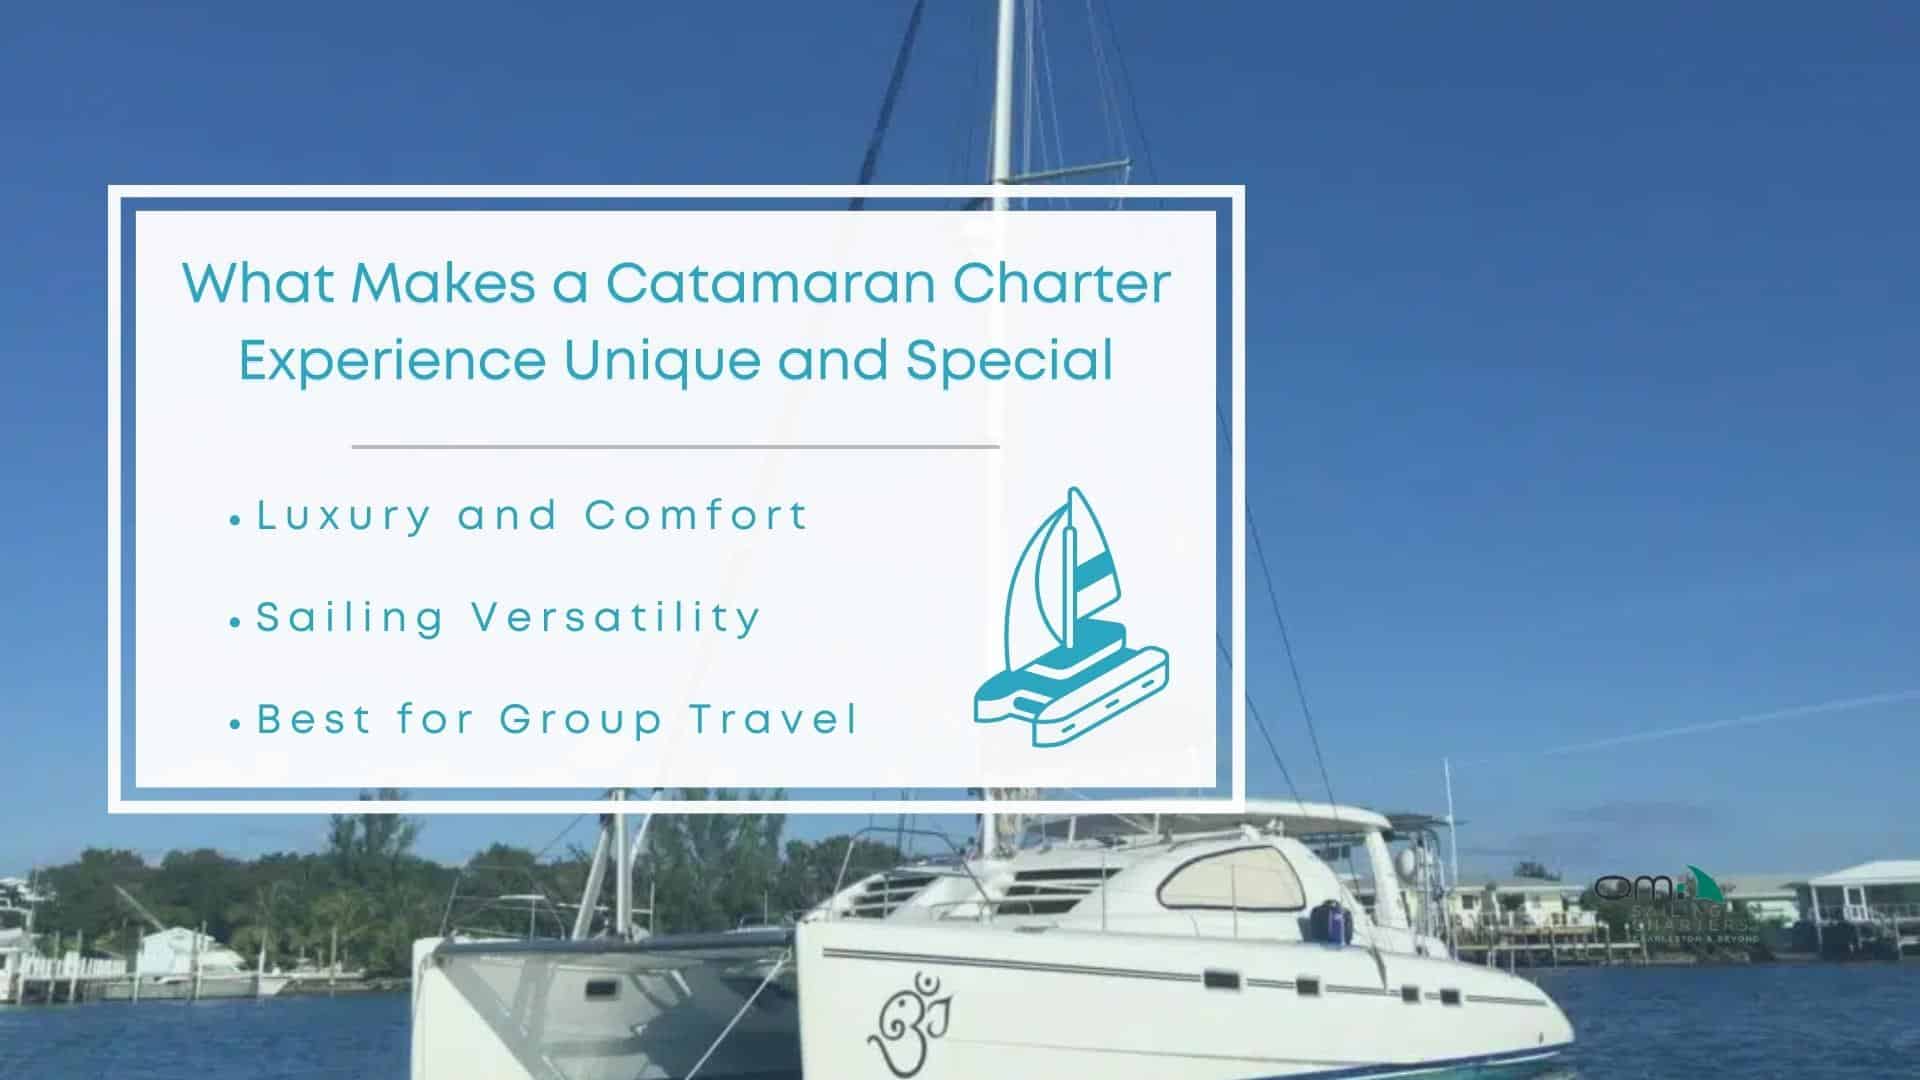 Infographic image of what makes a catamaran charter experience unique and special